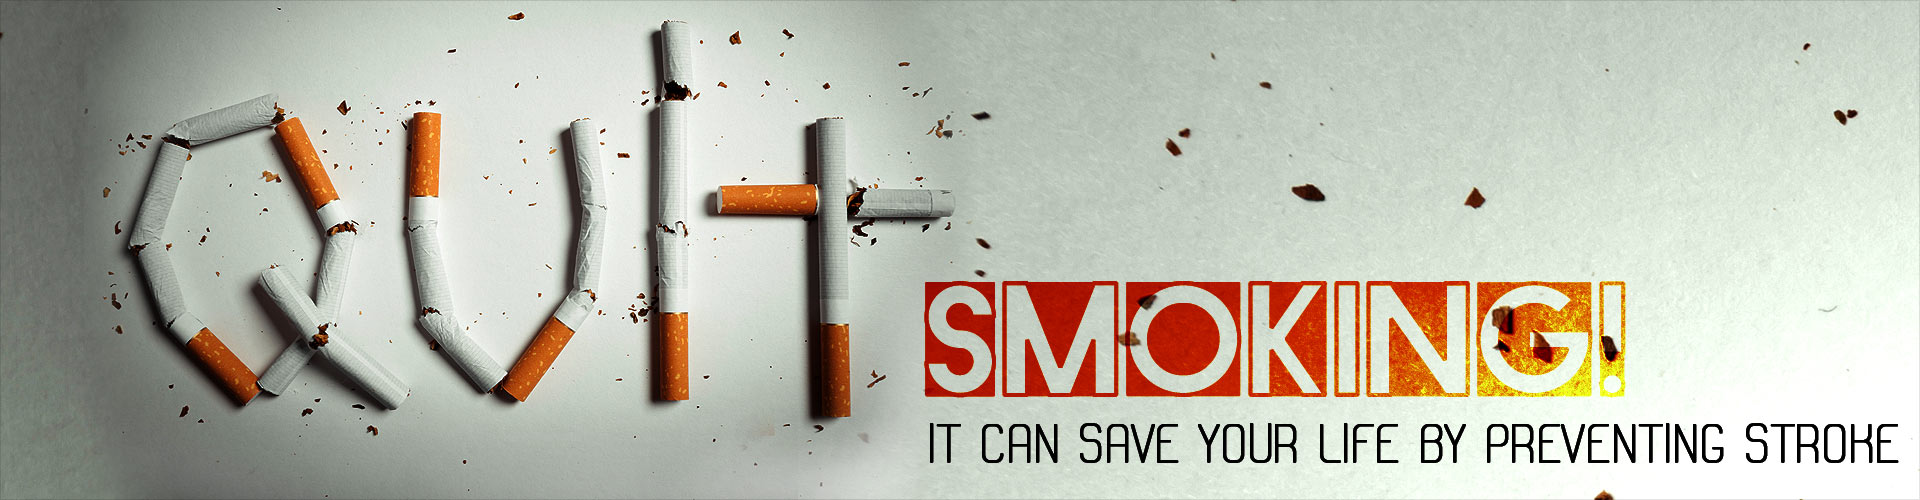 Quit smoking! It can save your life by preventing stroke